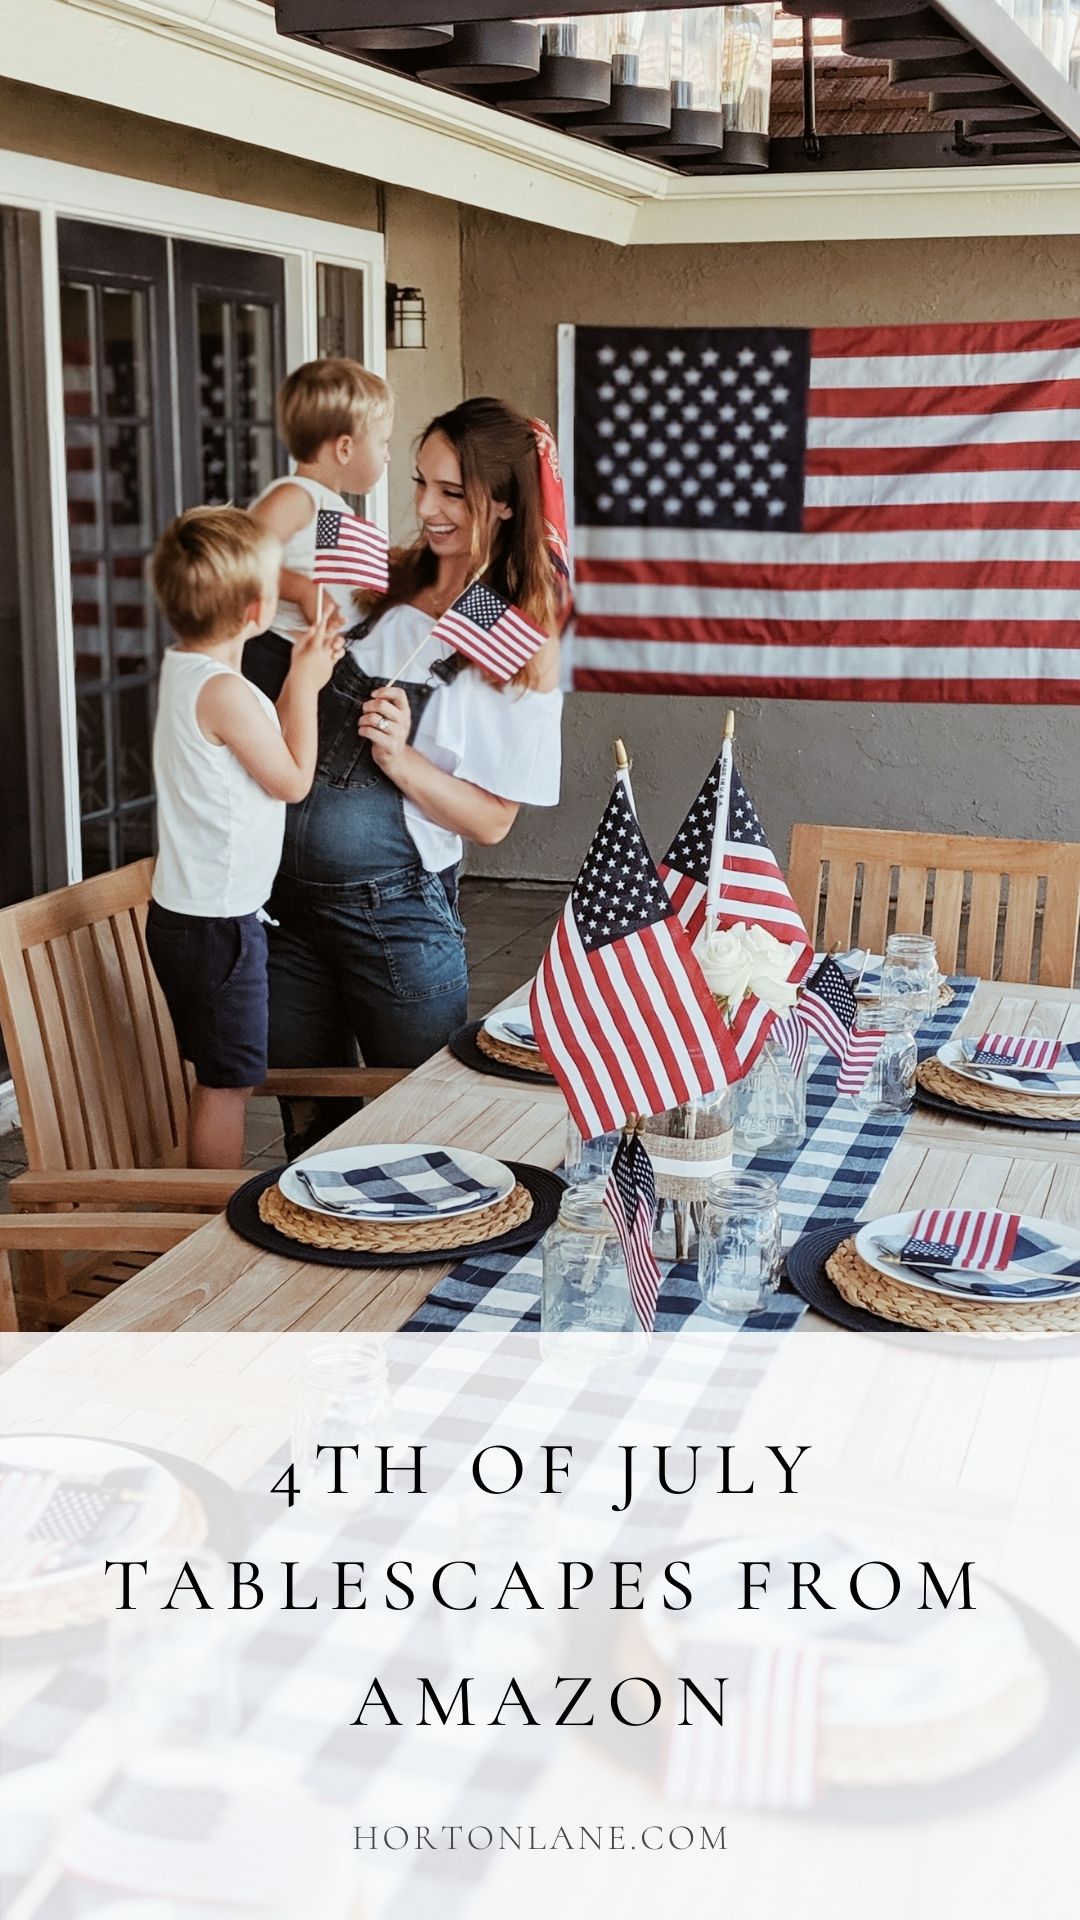 Pinterest Pin-4th of July tablescapes table decor table setting party decor from amazon